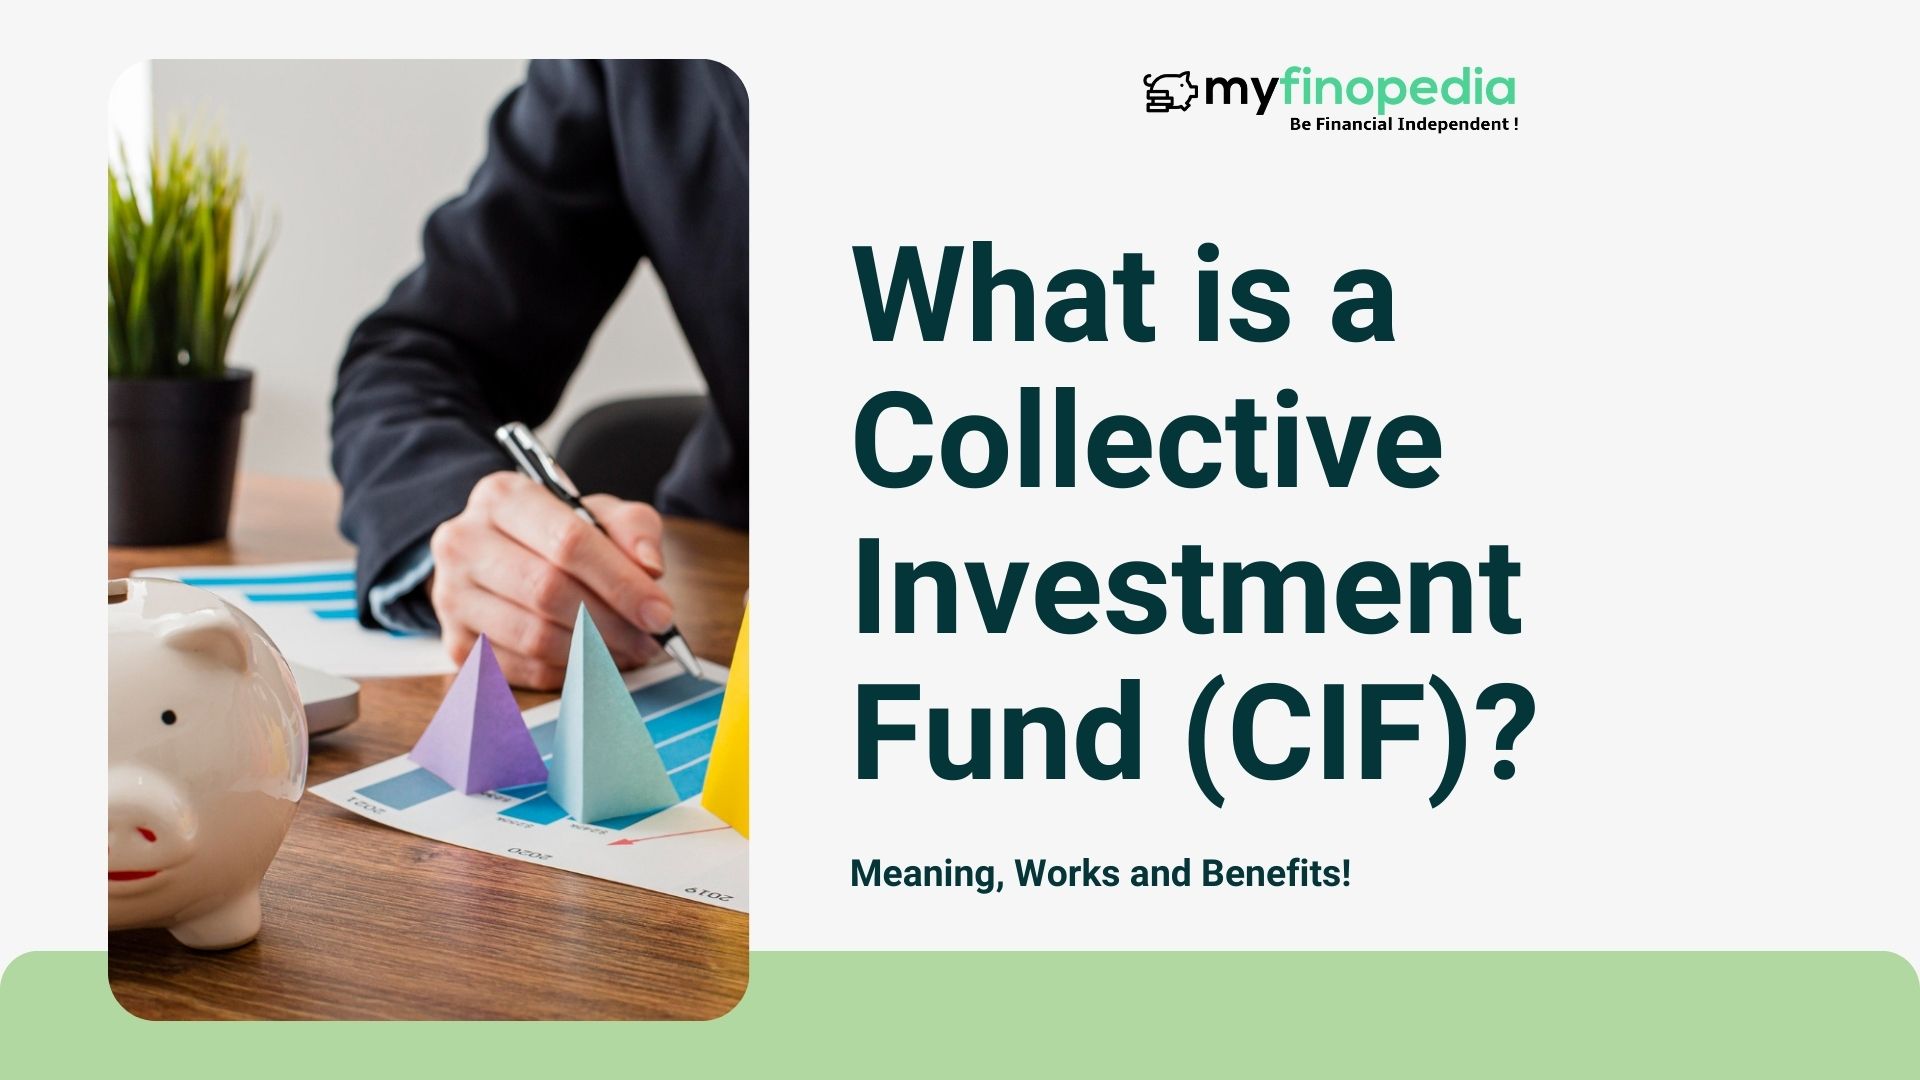 Collective Investment Fund